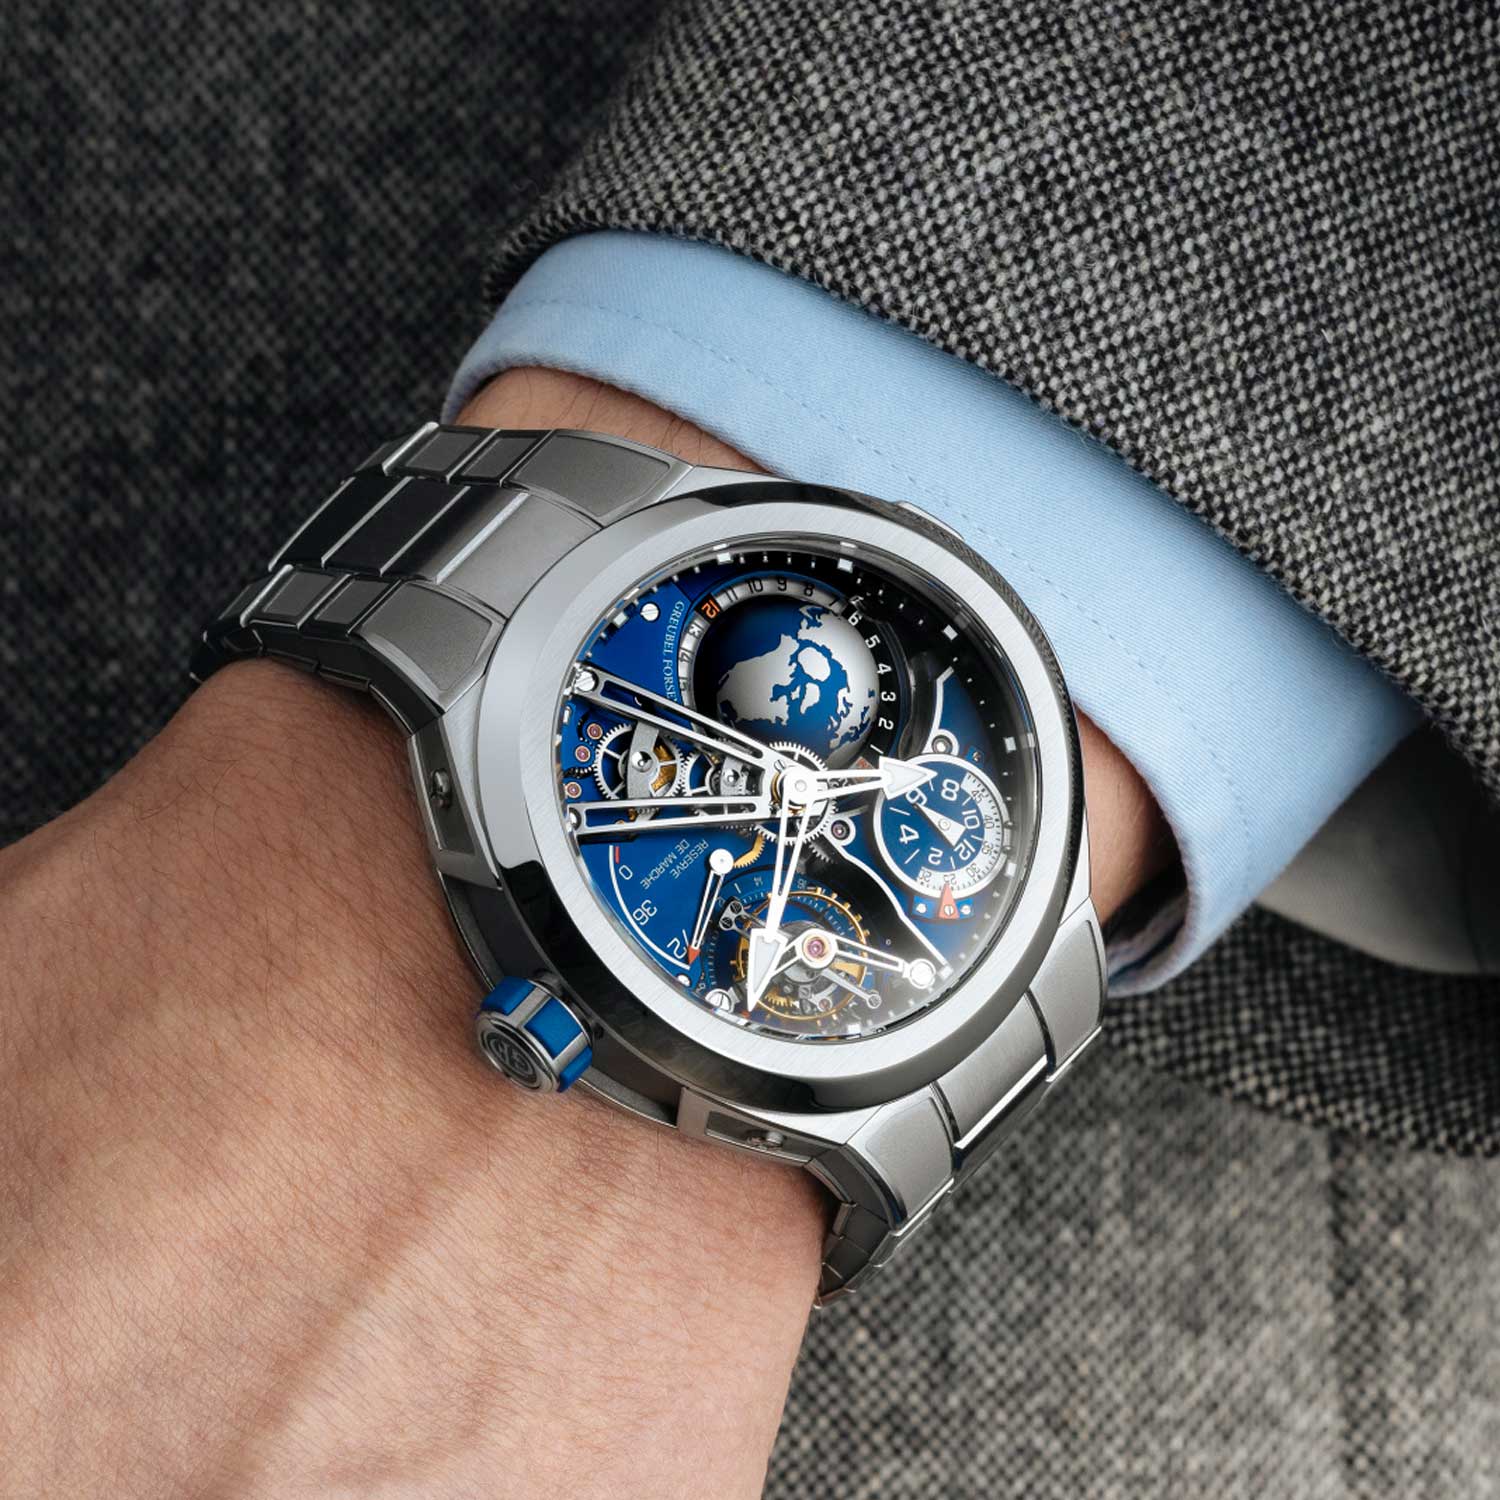 This is Greubel Forsey’s first timepiece in an all blue colorway, right from the mainplate to the globe and the second time zone dial, everything is in the same blue hue.